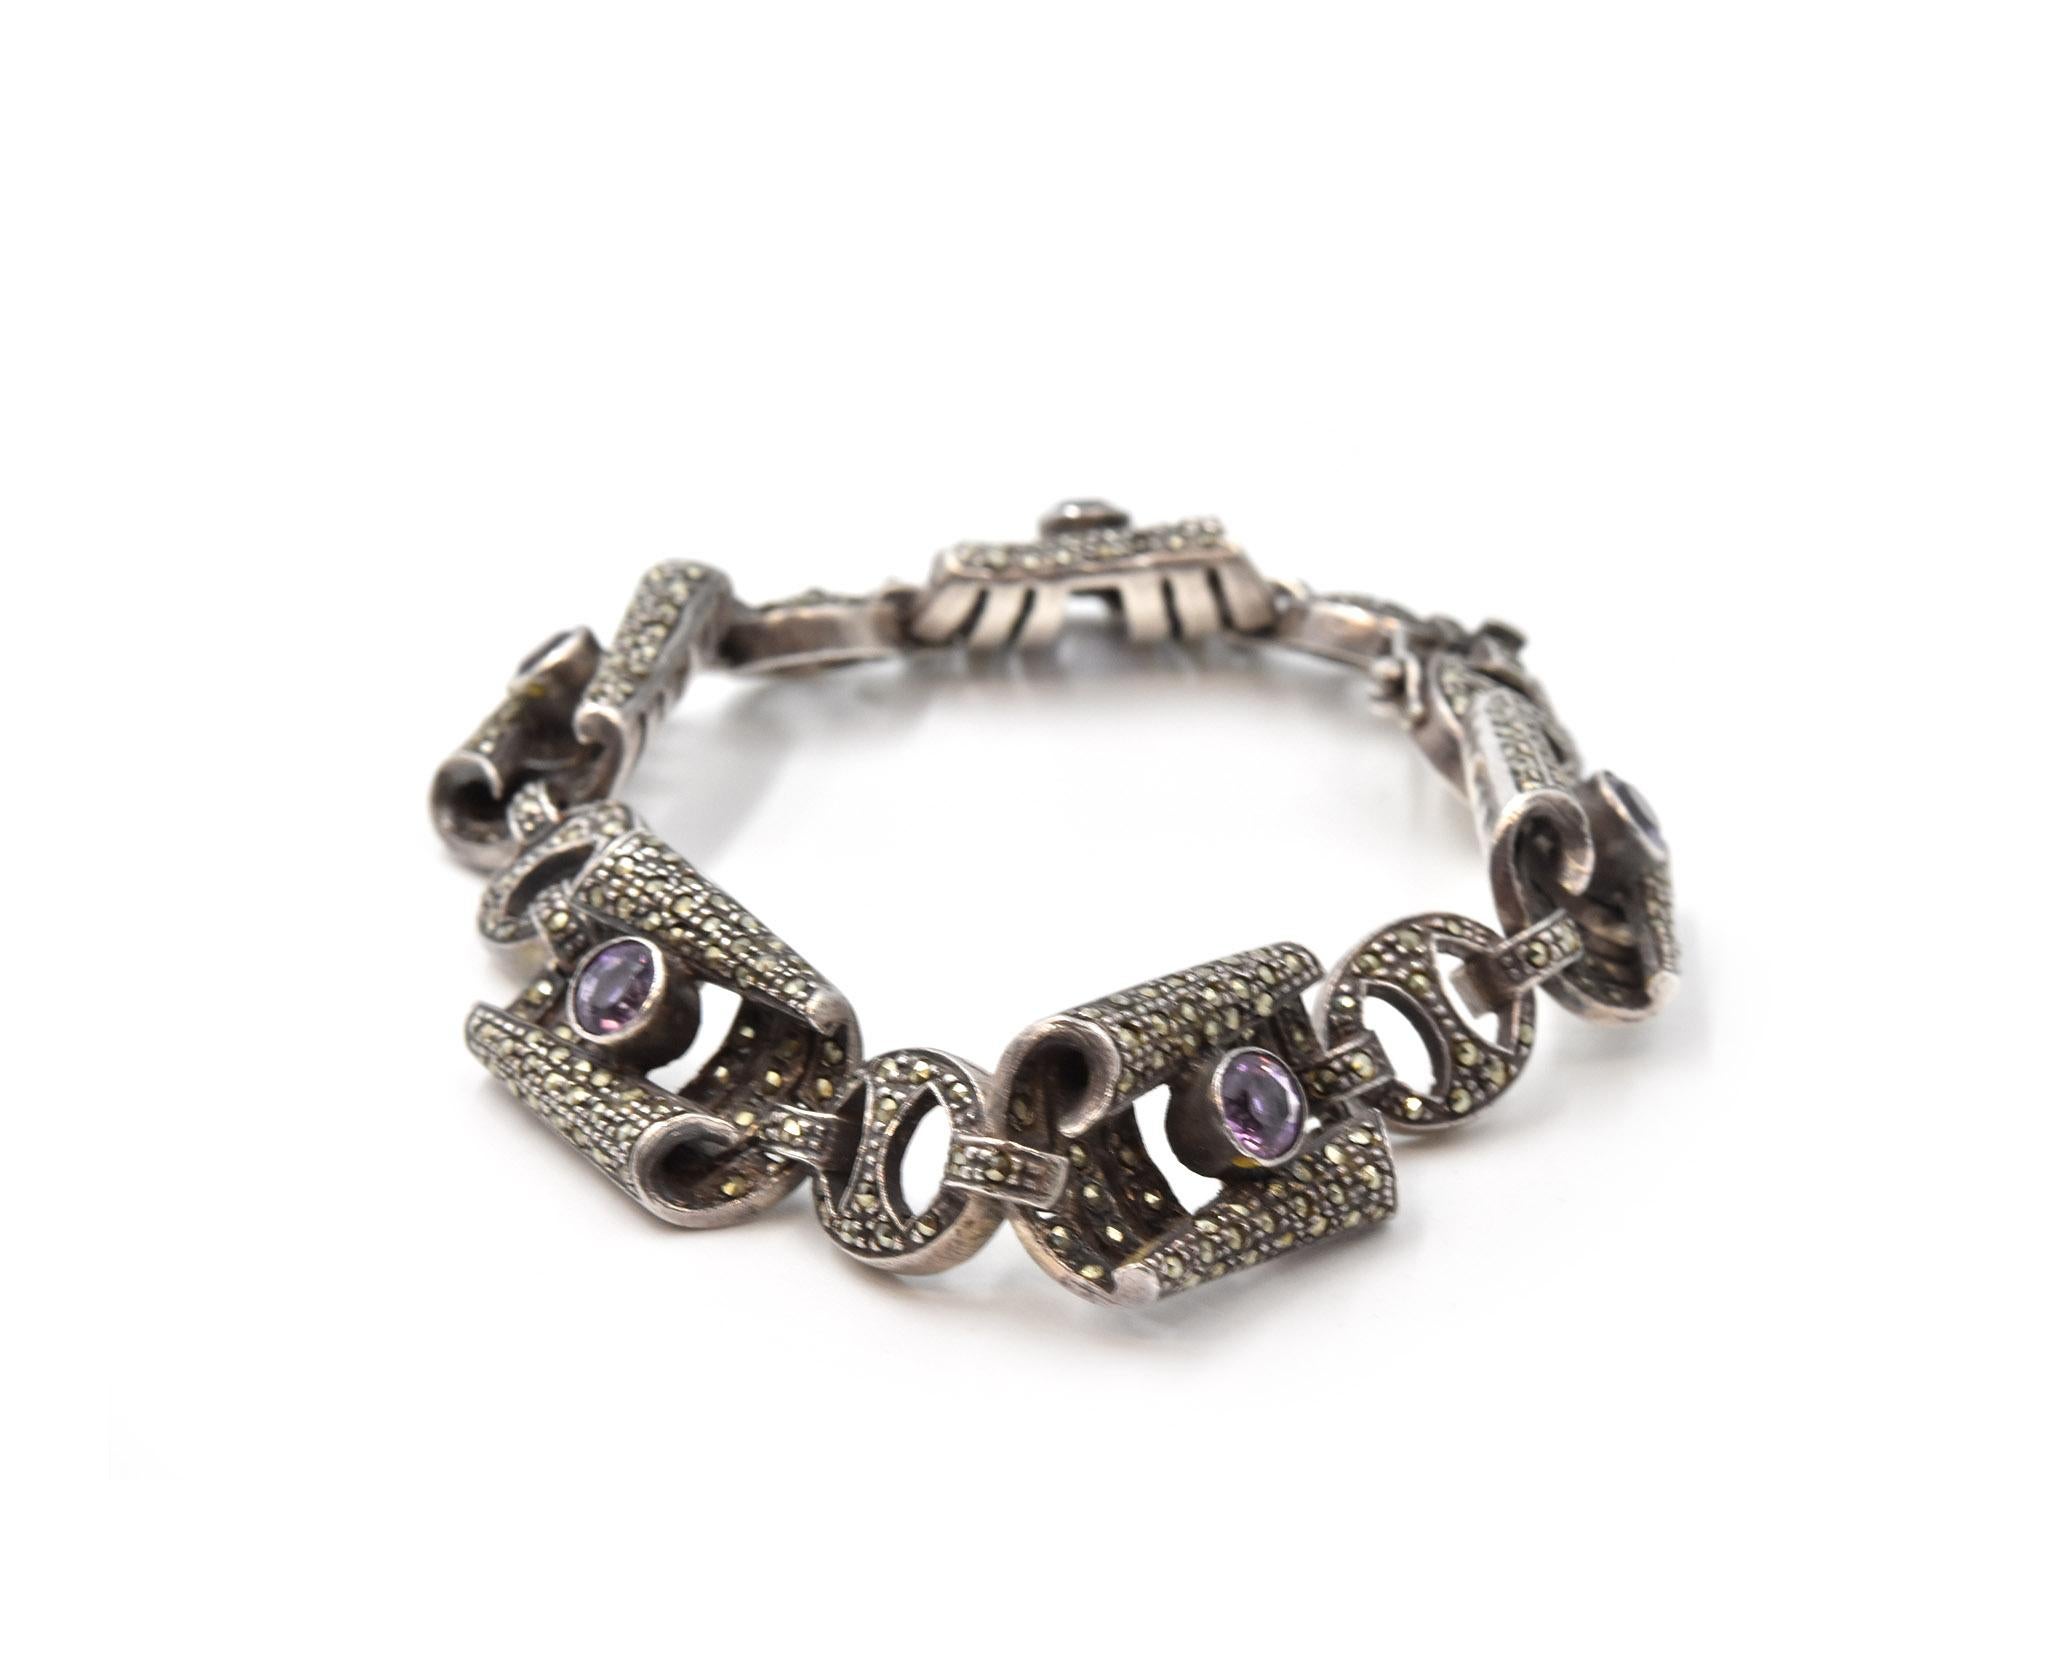 Designer: custom design
Material: sterling silver
Gemstones: marcasite & amethyst
Dimensions: bracelet will fit 7 1/2-inch wrist and 1/2-inch wide
Weight: 40.60 grams
